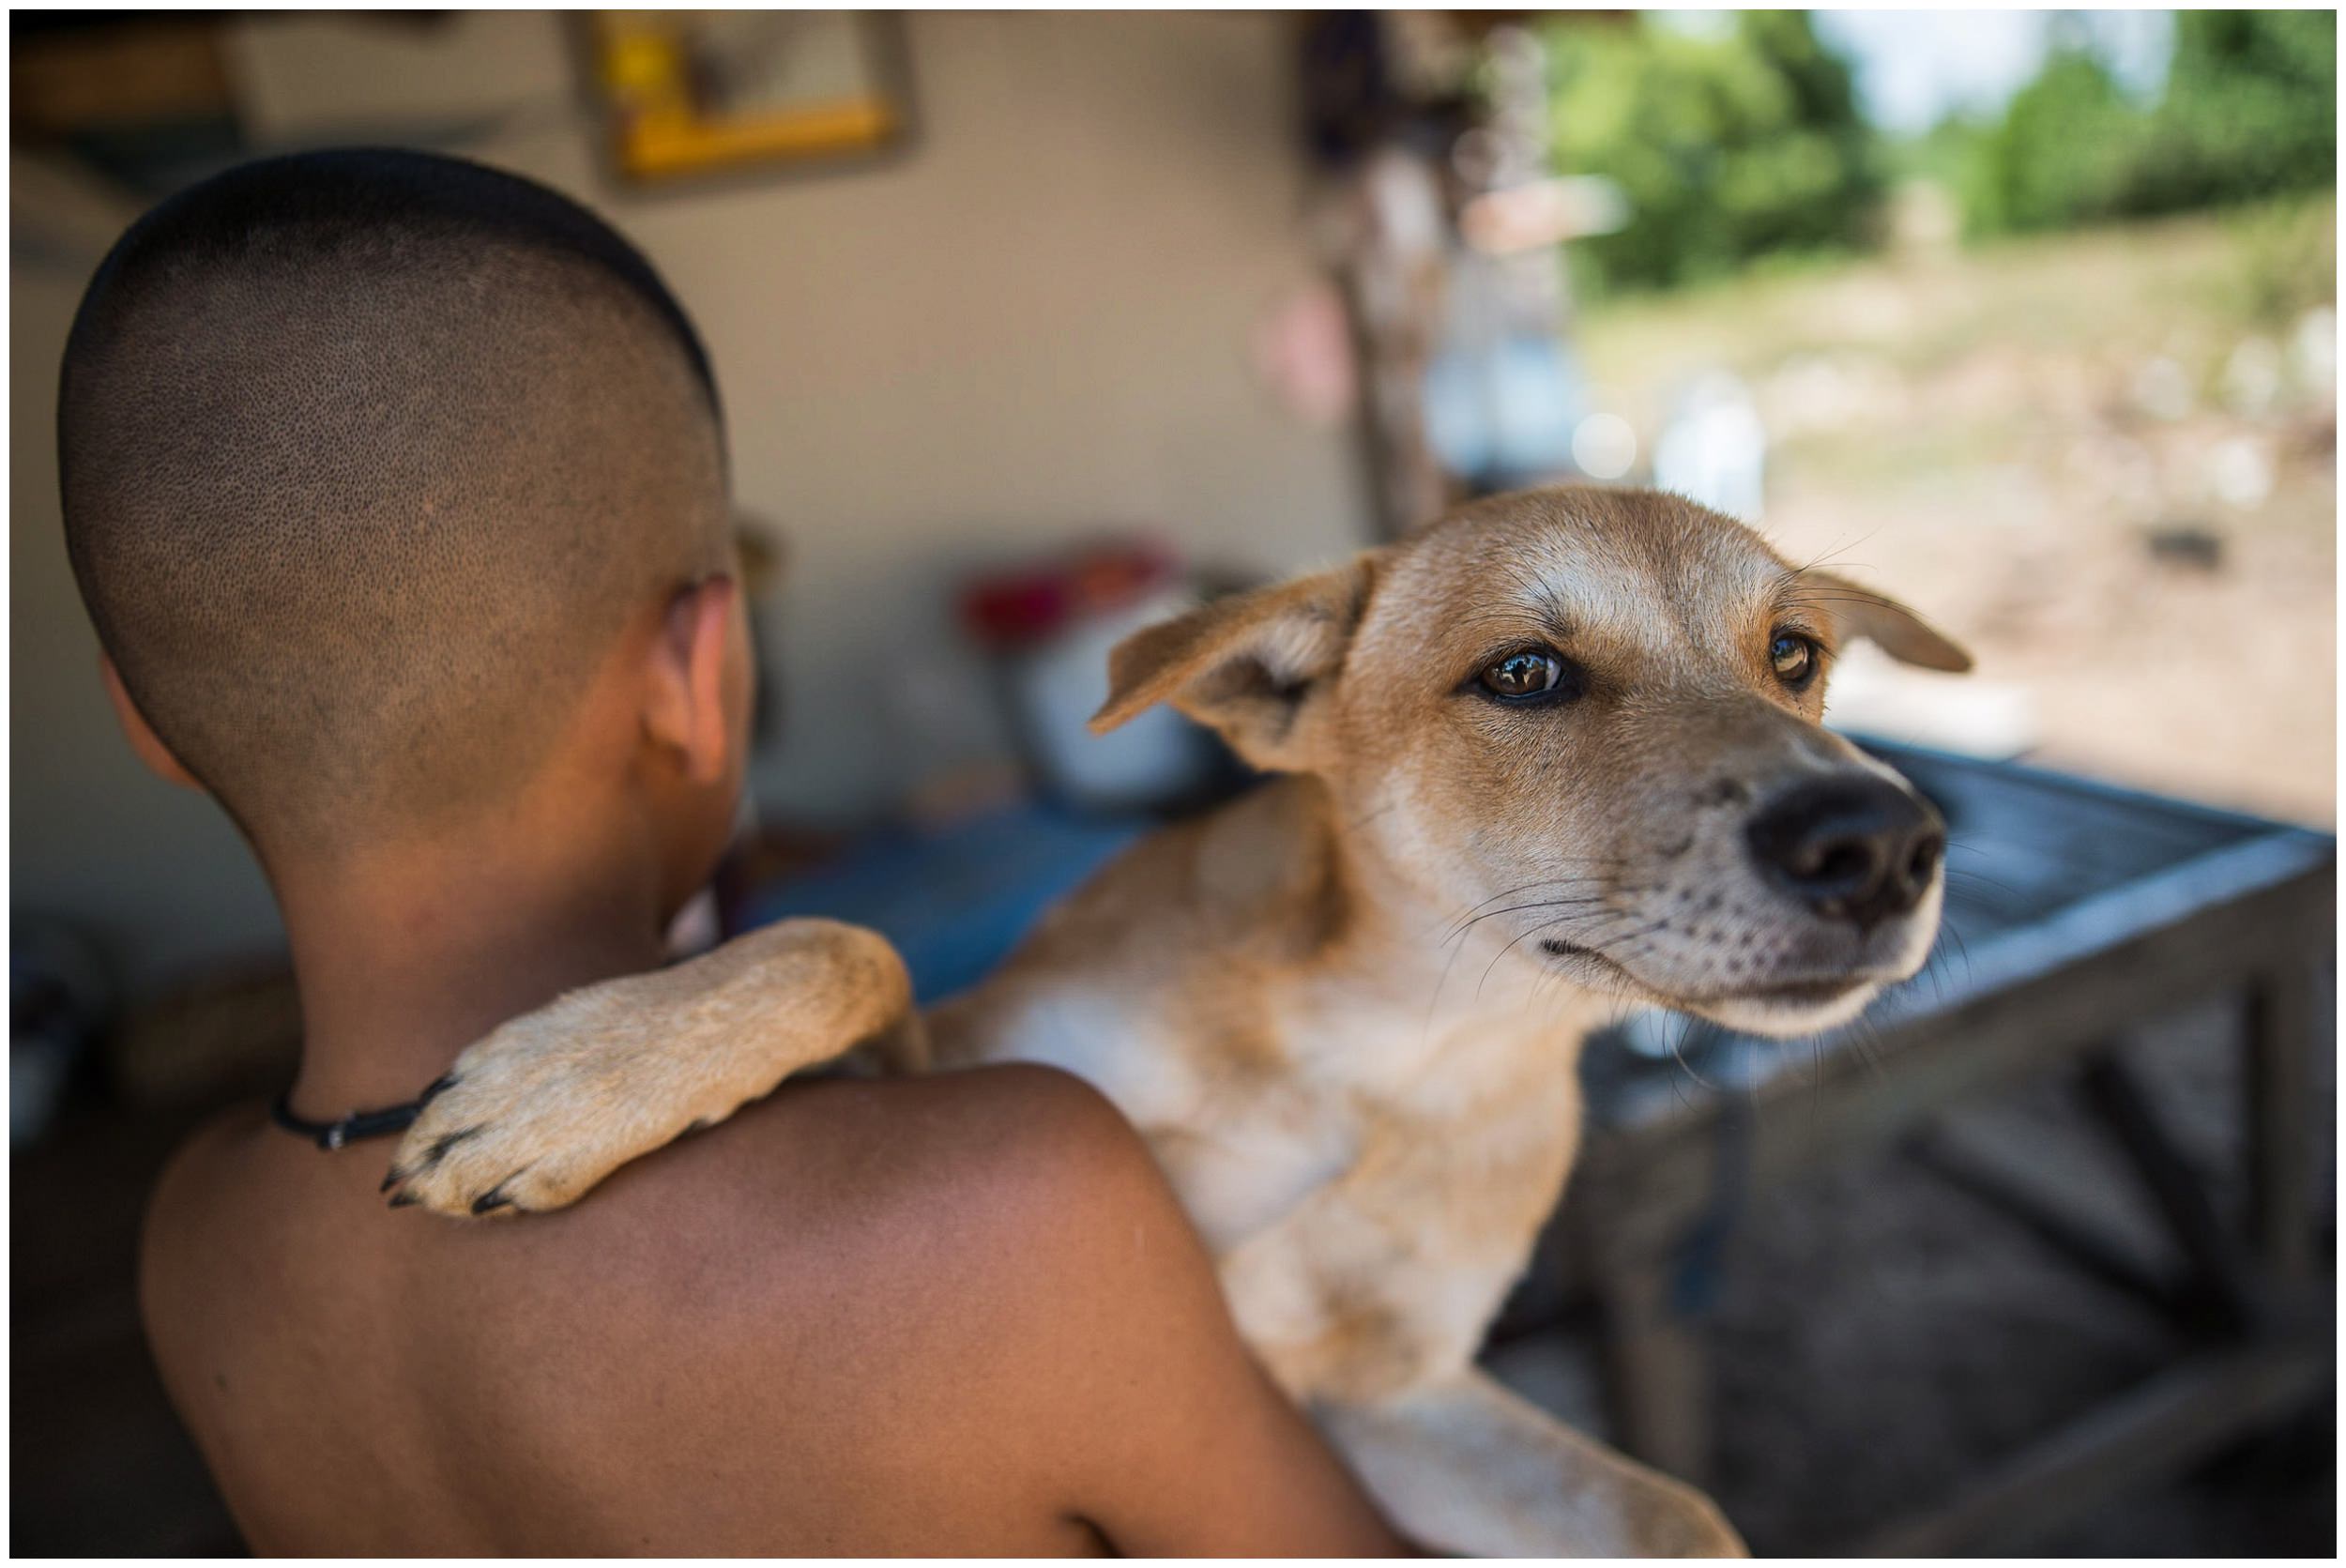 headrock, dogs, shelter, rescue, old, coulple, project, honden, bang saphan, thailand